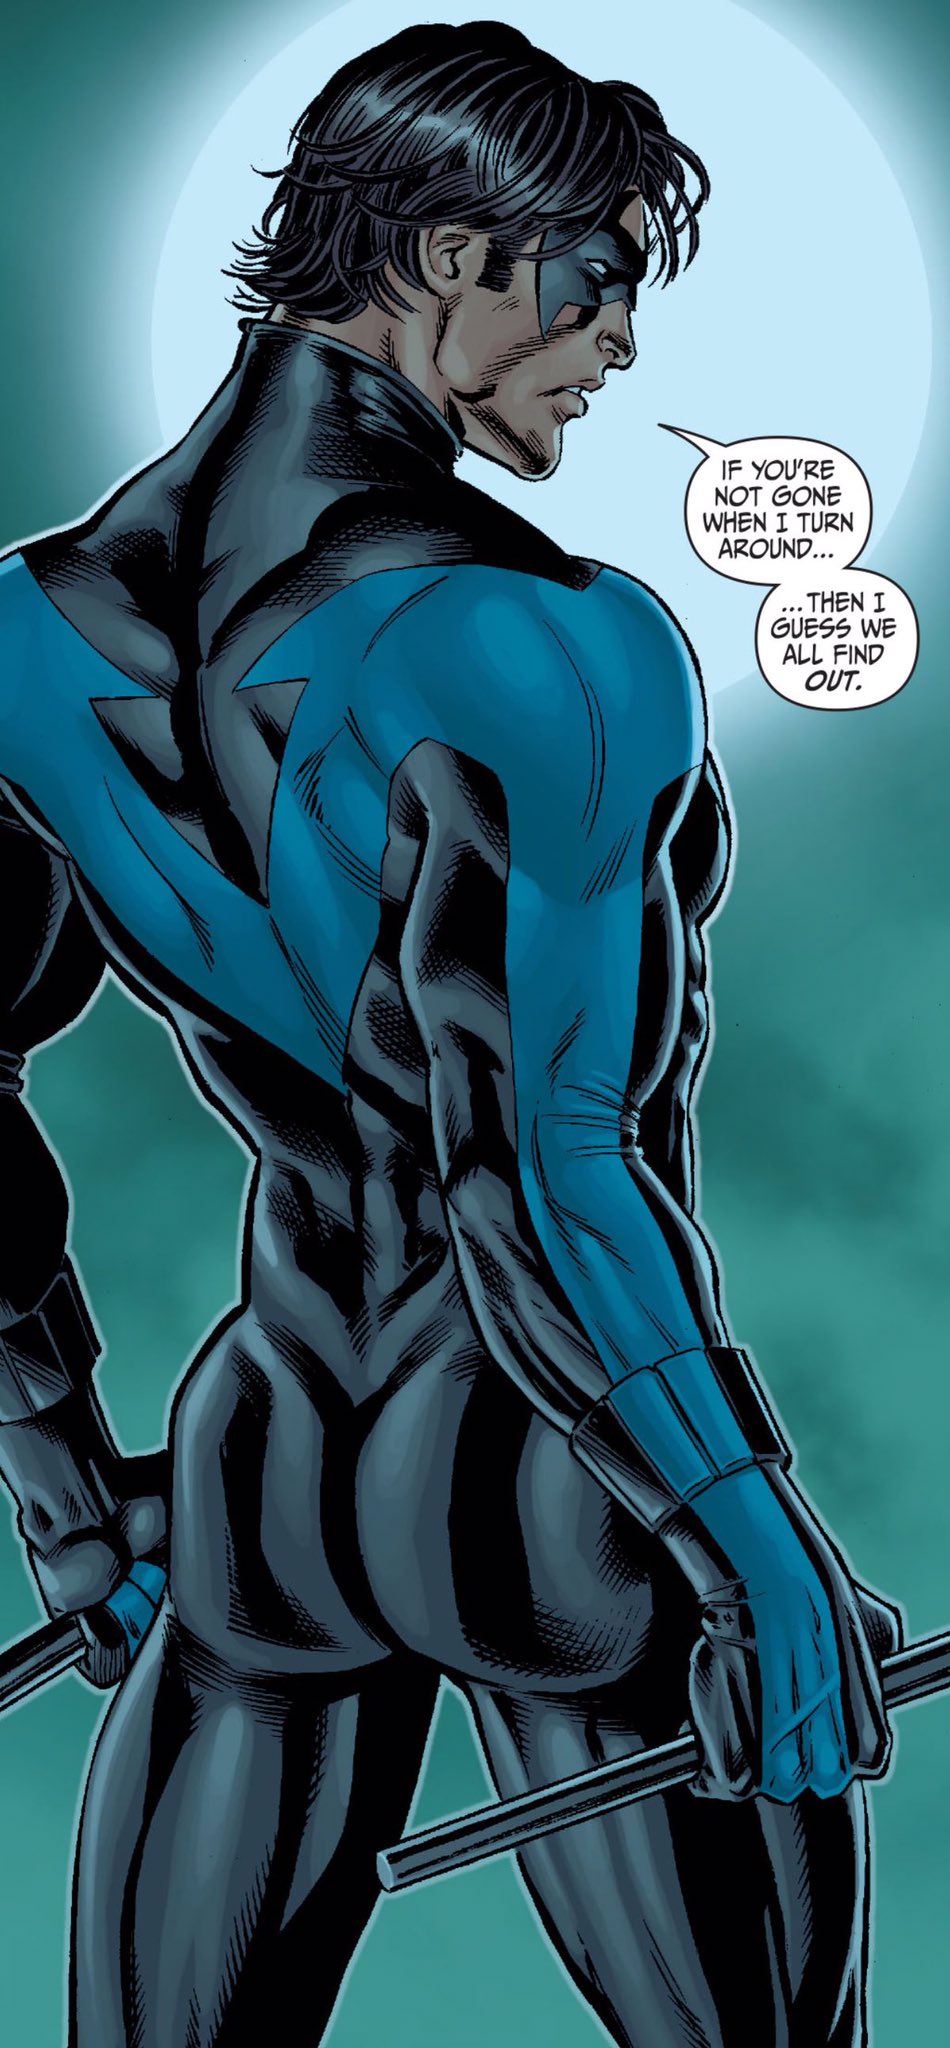 nightwing art of him with his huge butt facing the camera